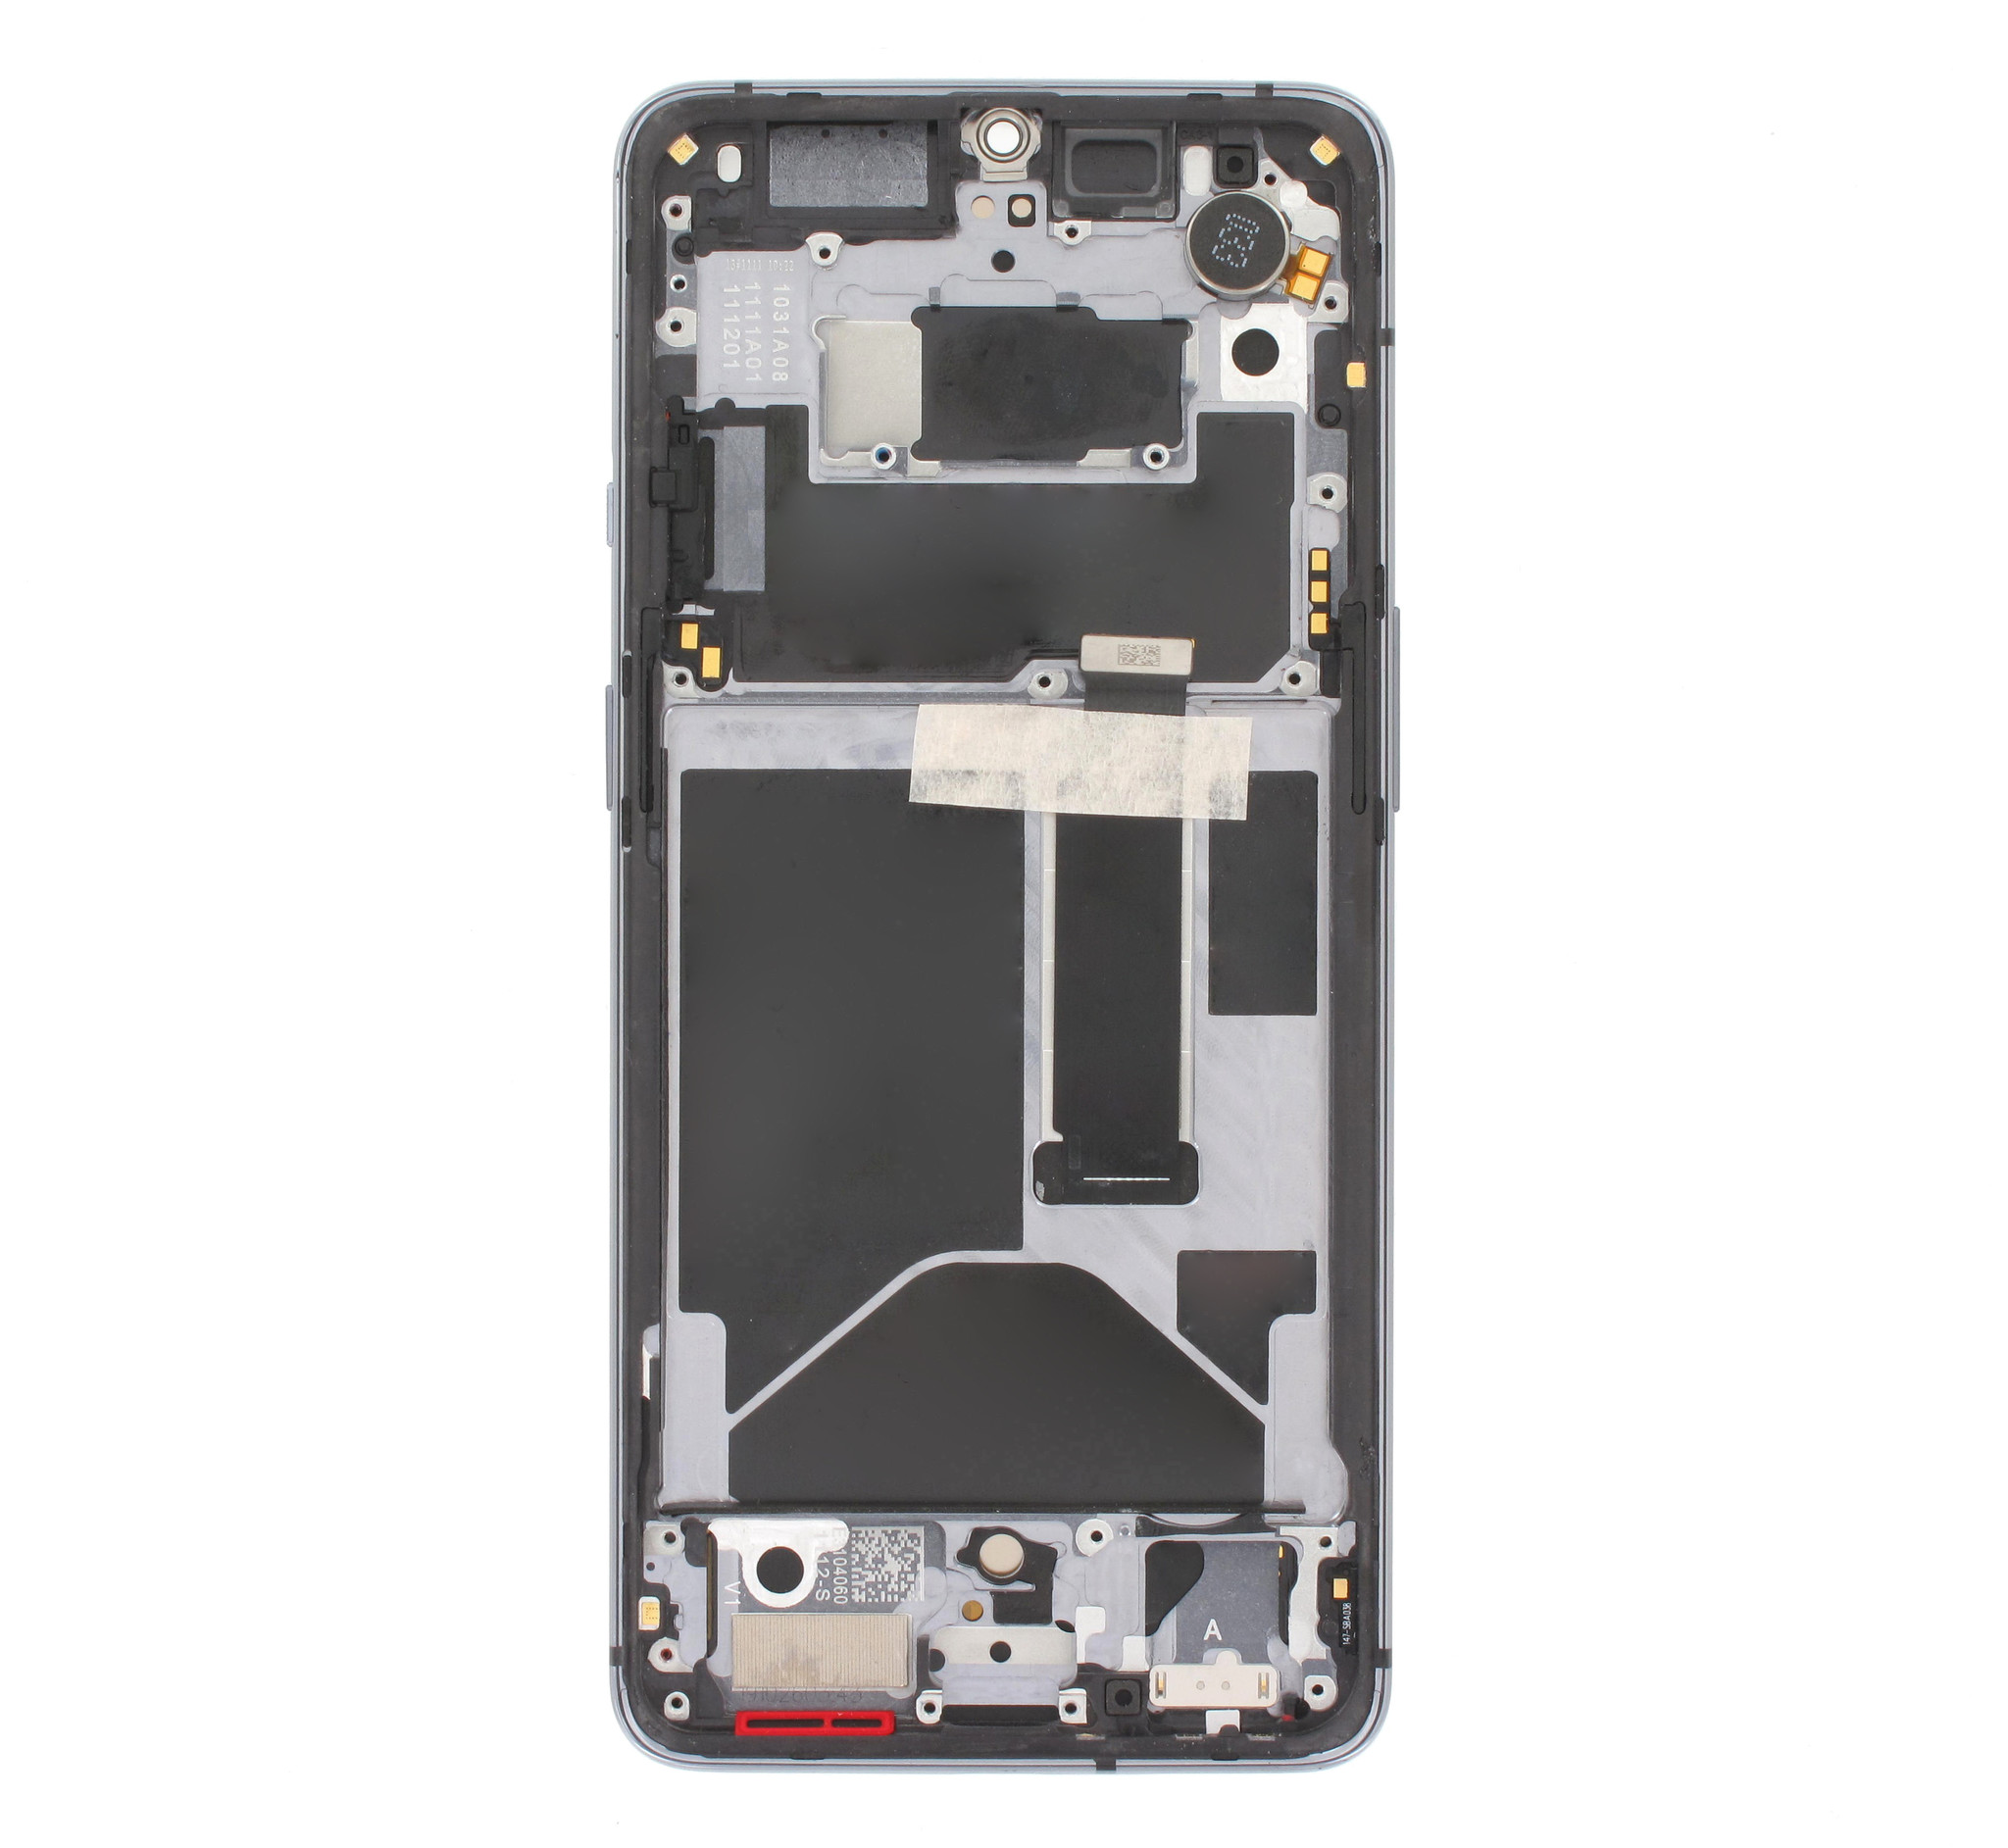 OnePlus 7T (HD1903) LCD Display, Frosted Silver/Silber, 2011100084 -  Parts4GSM